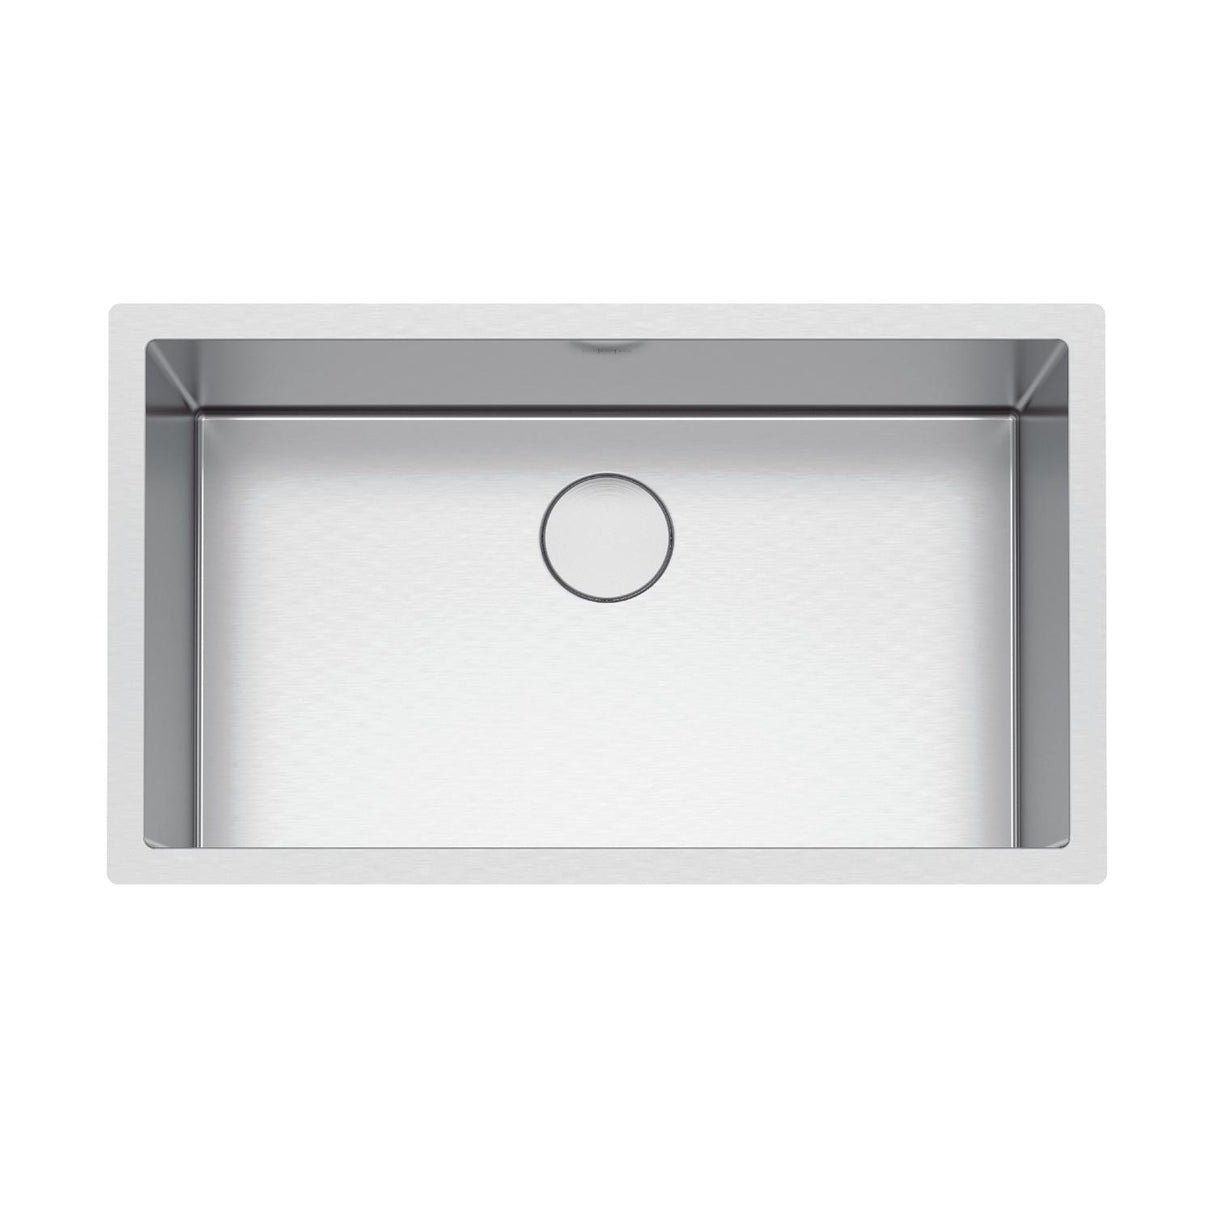 FRANKE PS2X110-30-12 Professional 2.0 32.5-in. x 19.5-in. x 12.0-in. 16 Gauge Stainless Steel Undermount Single Bowl Kitchen Sink -PS2X110-30-12 In Diamond